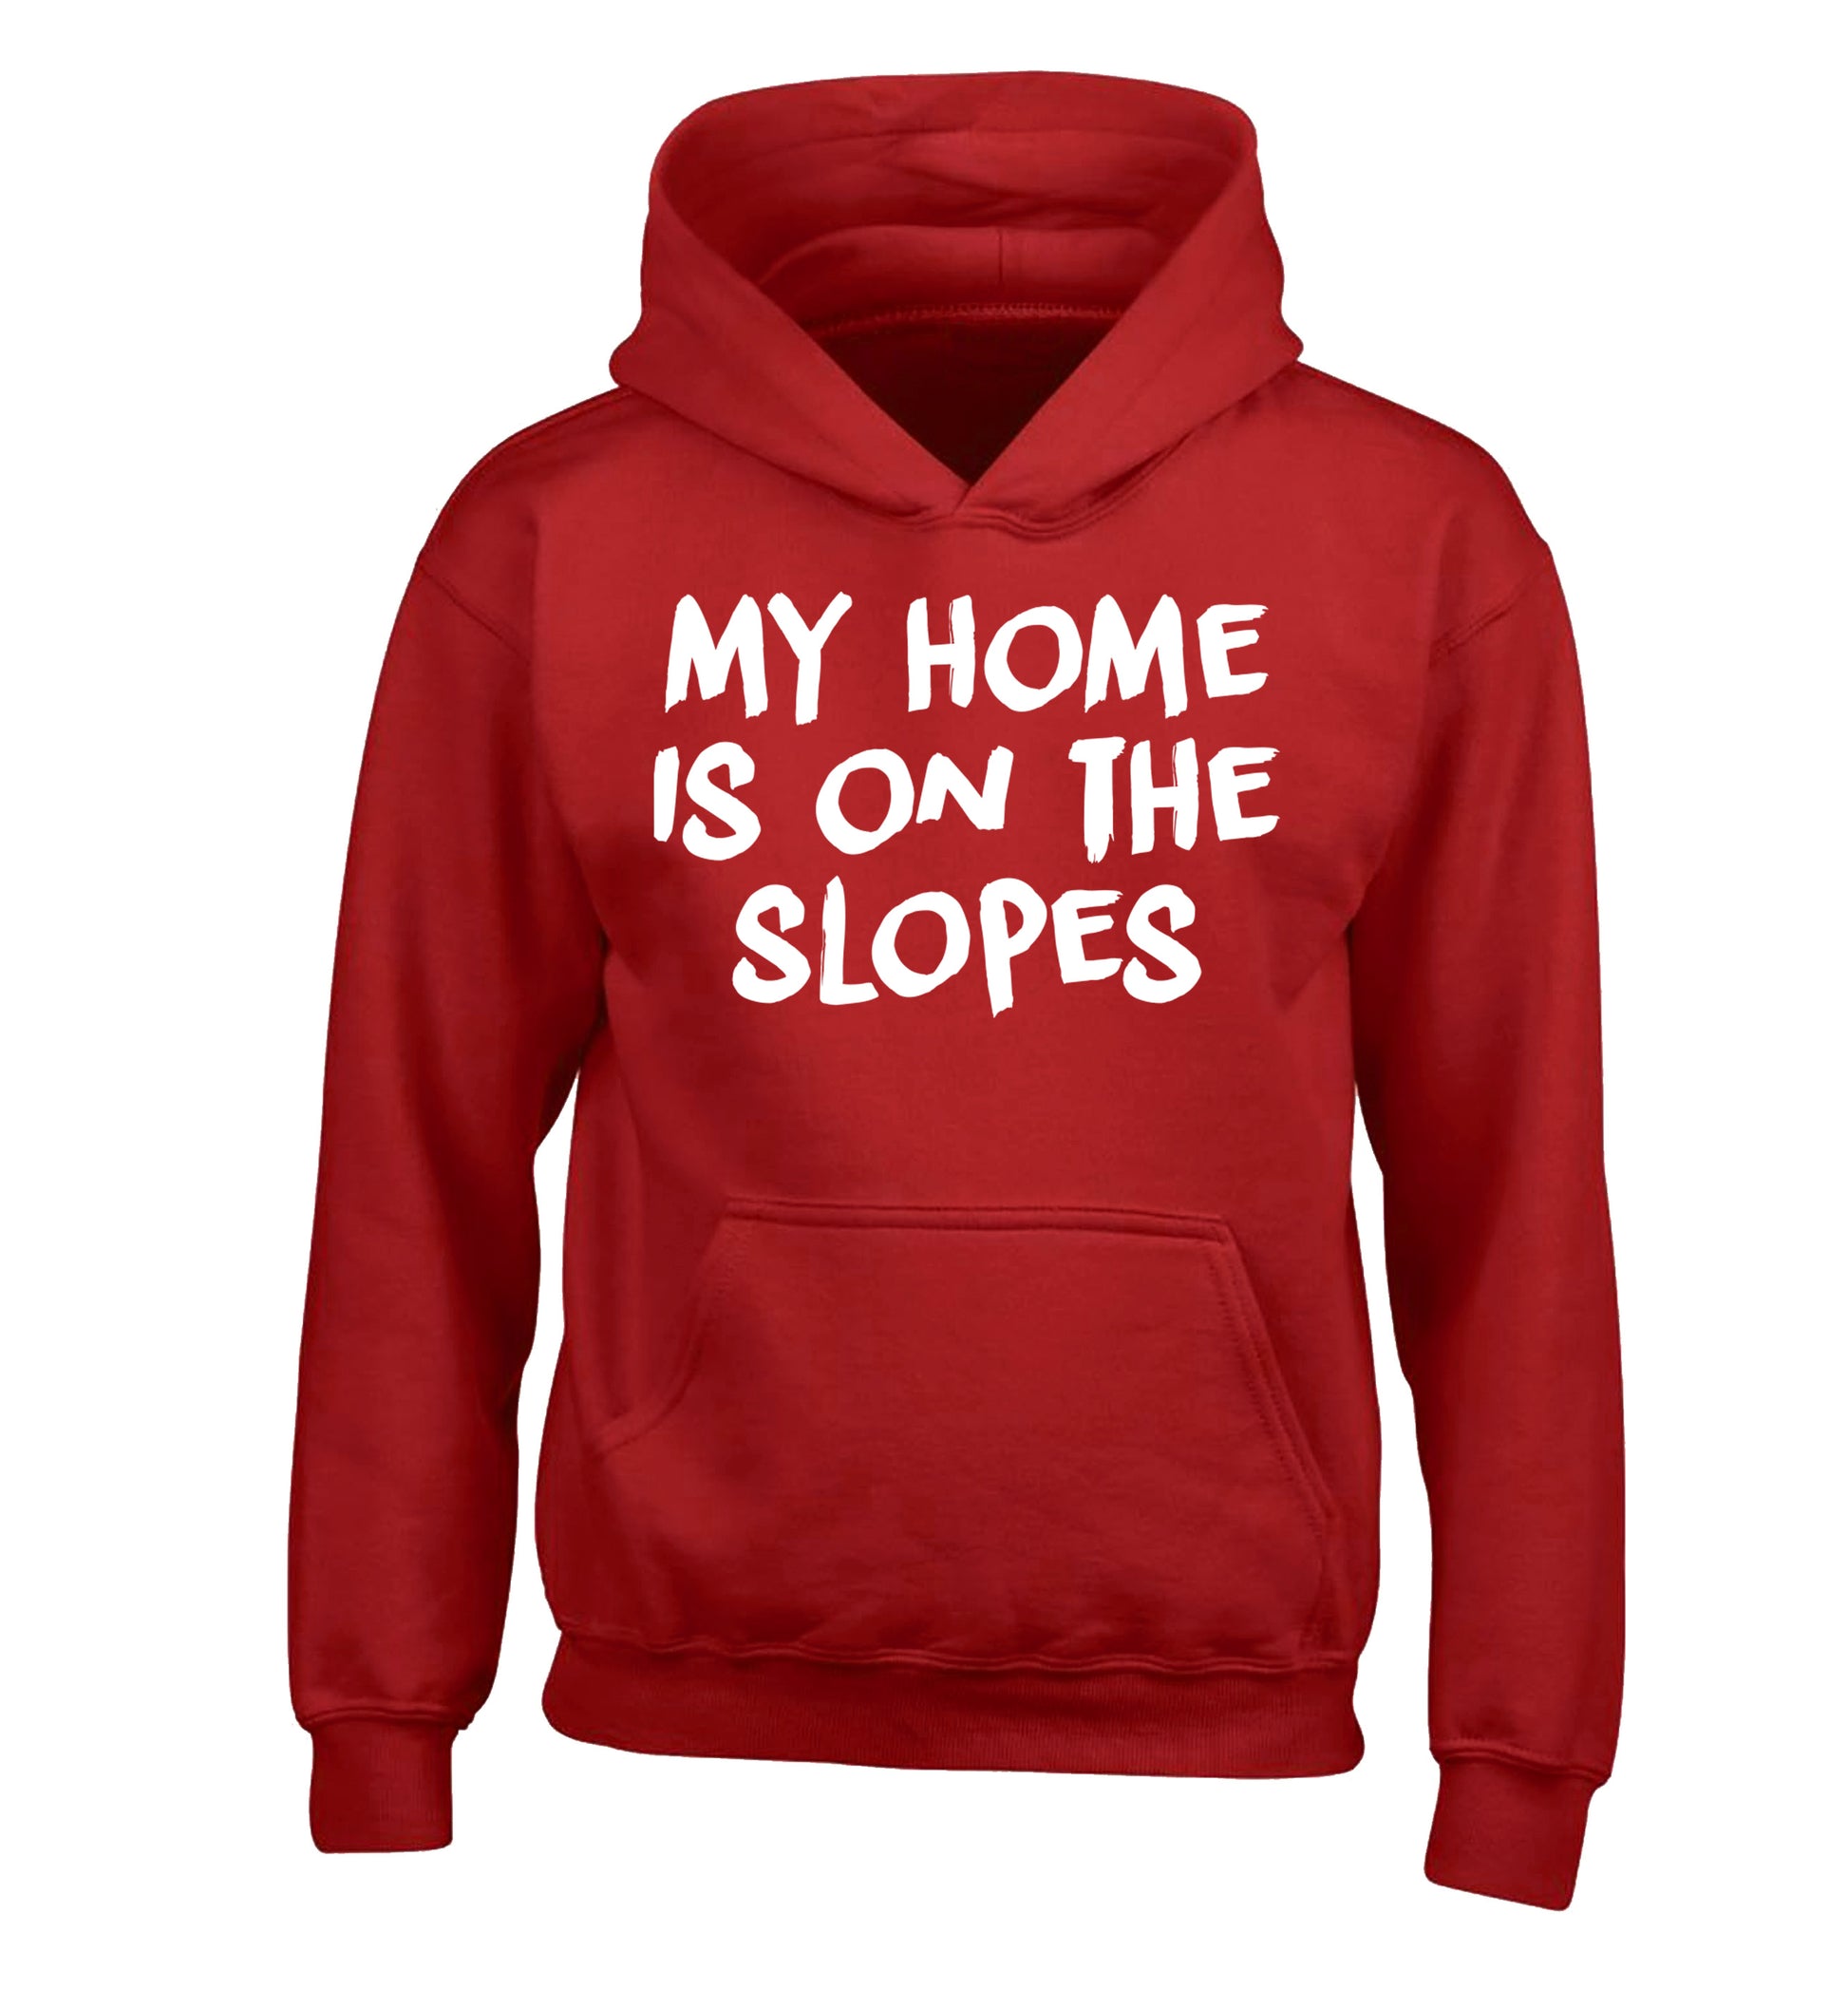 My home is on the slopes children's red hoodie 12-14 Years